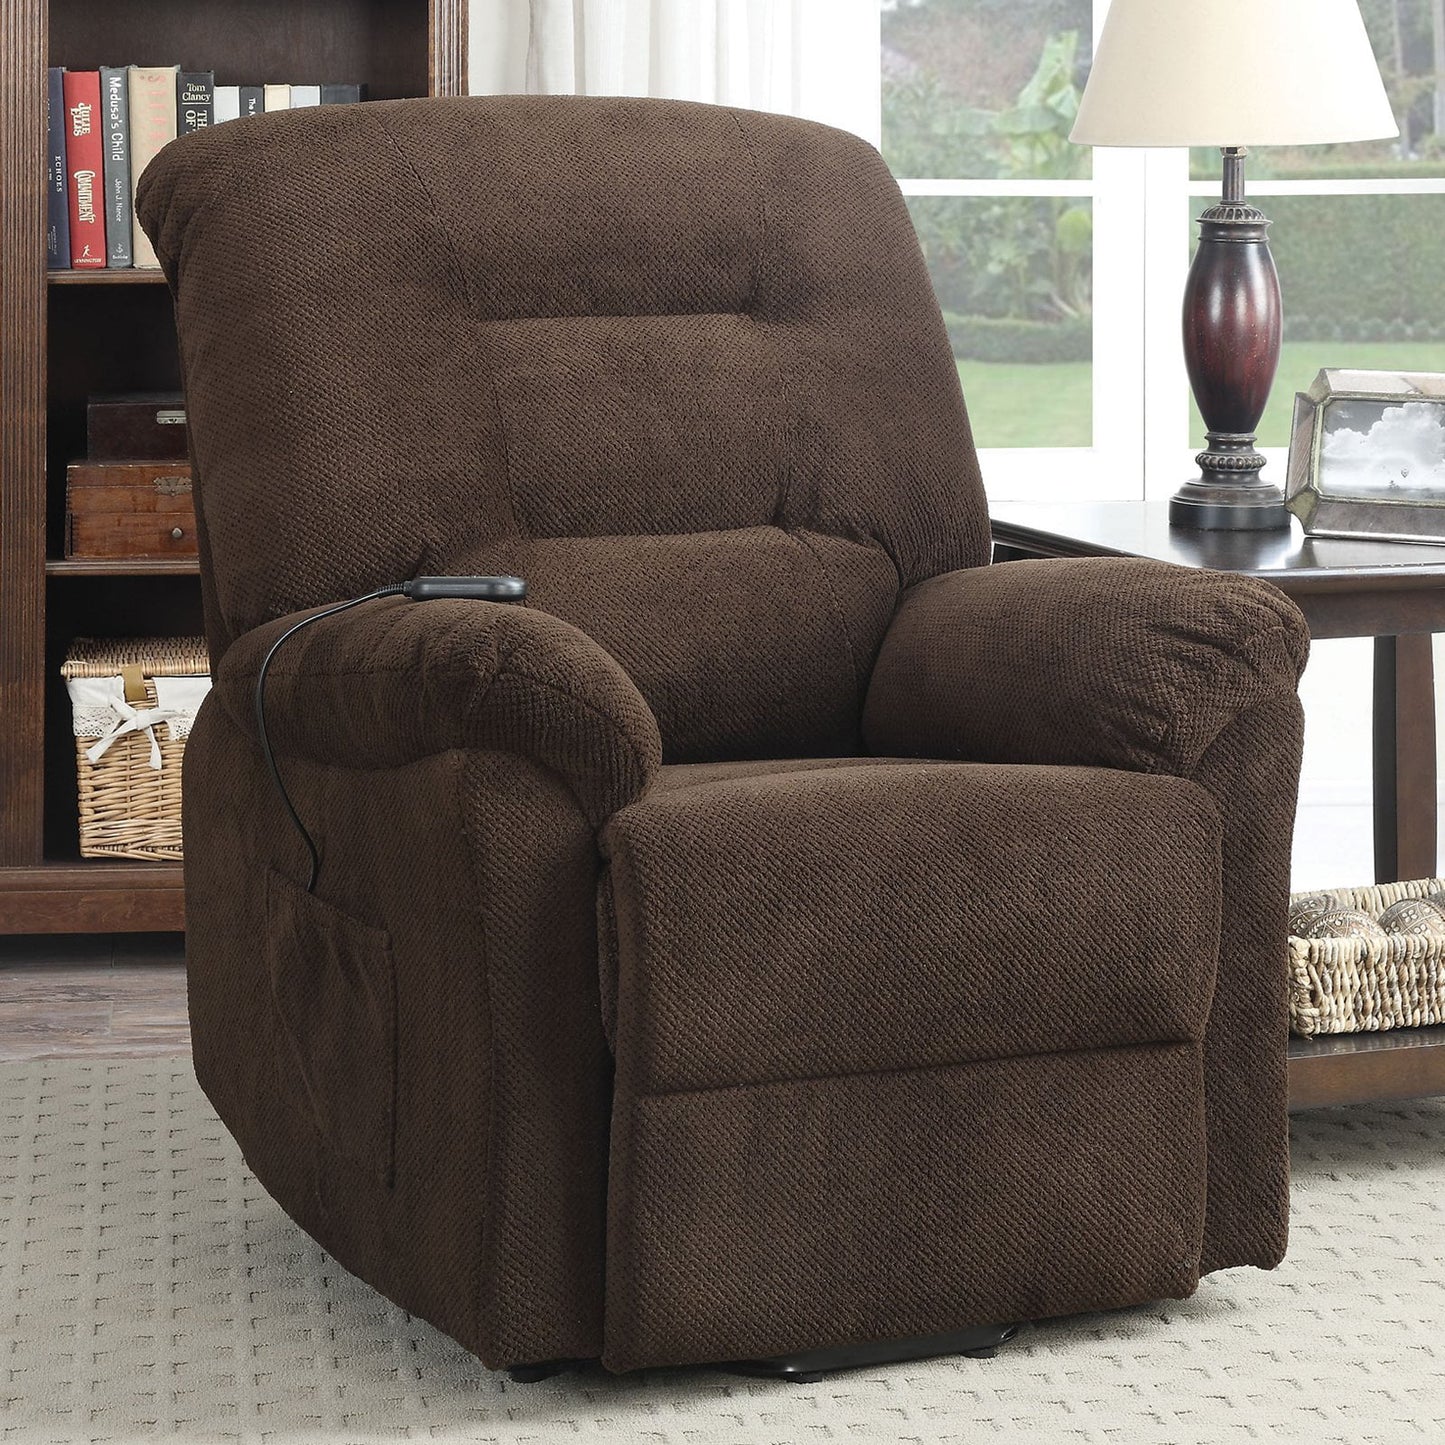 Upholstered Power Lift Recliner Chocolate